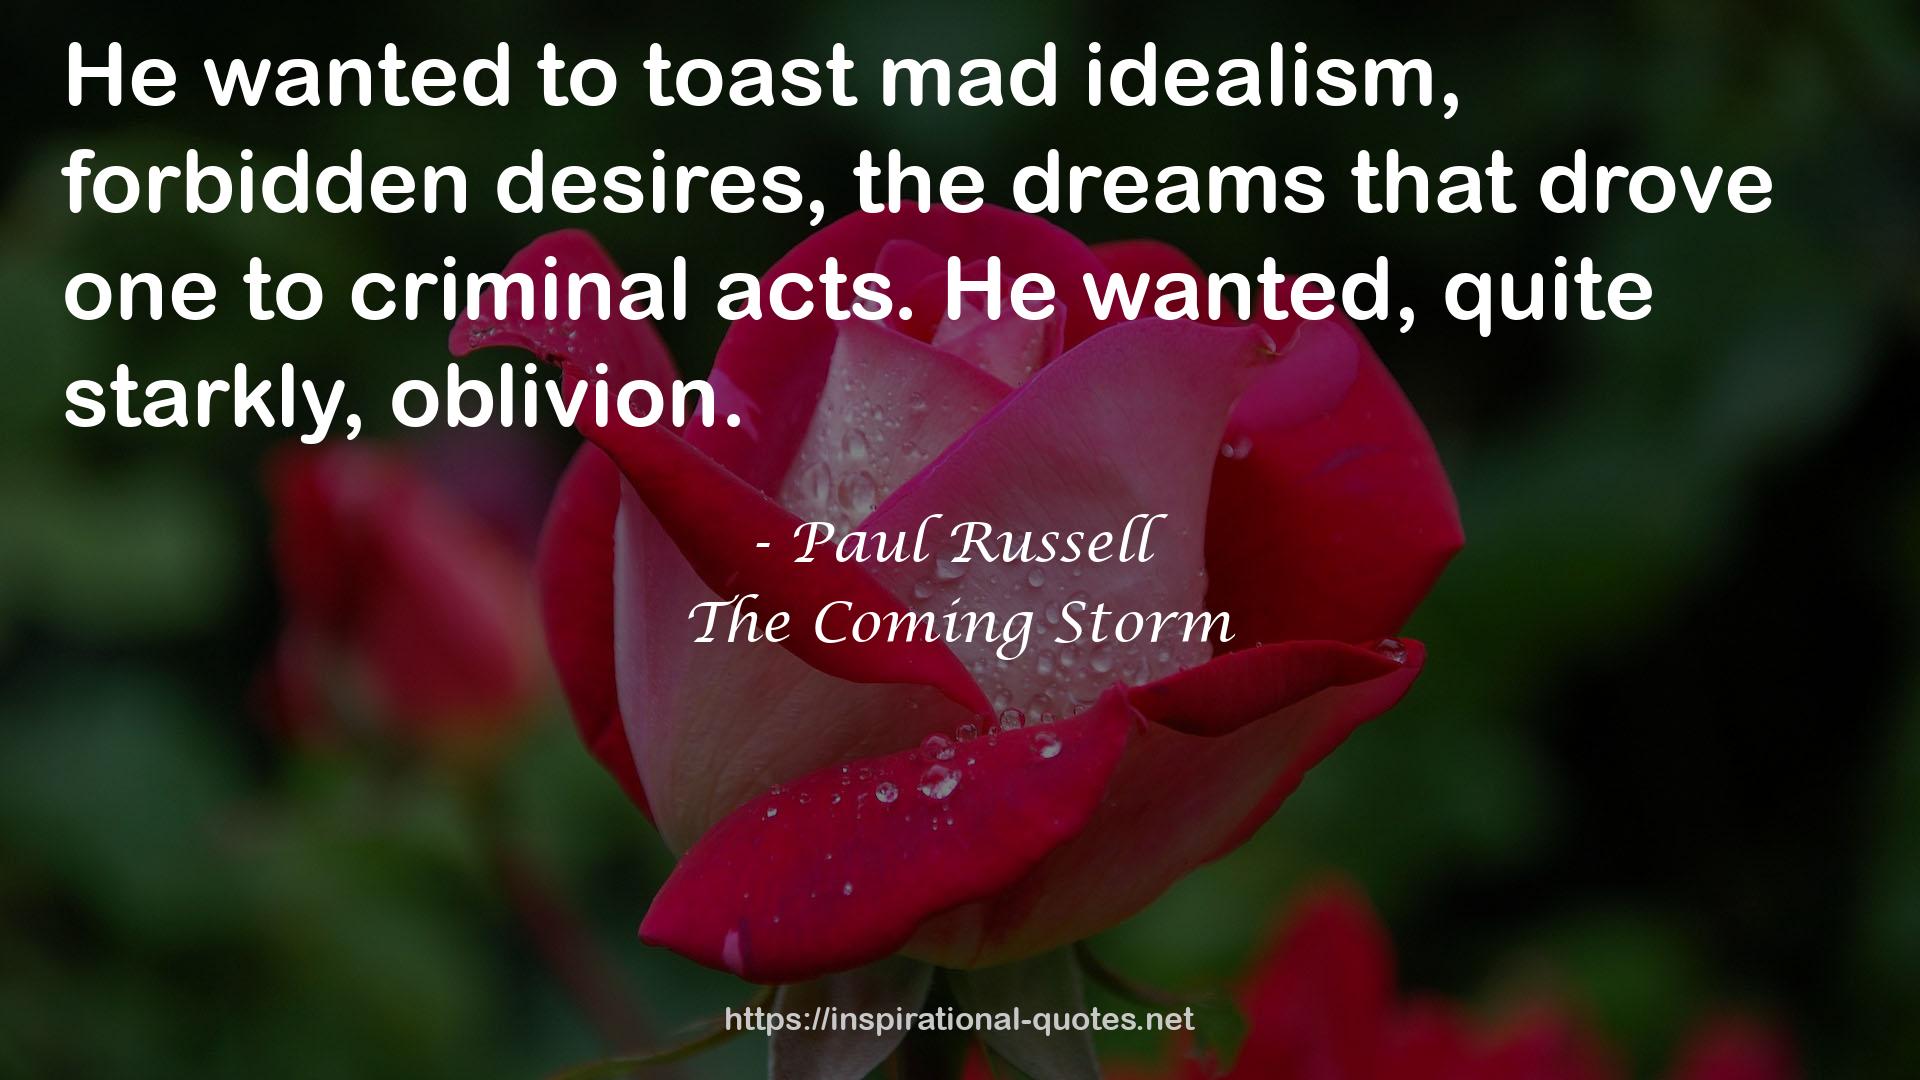 Paul Russell QUOTES